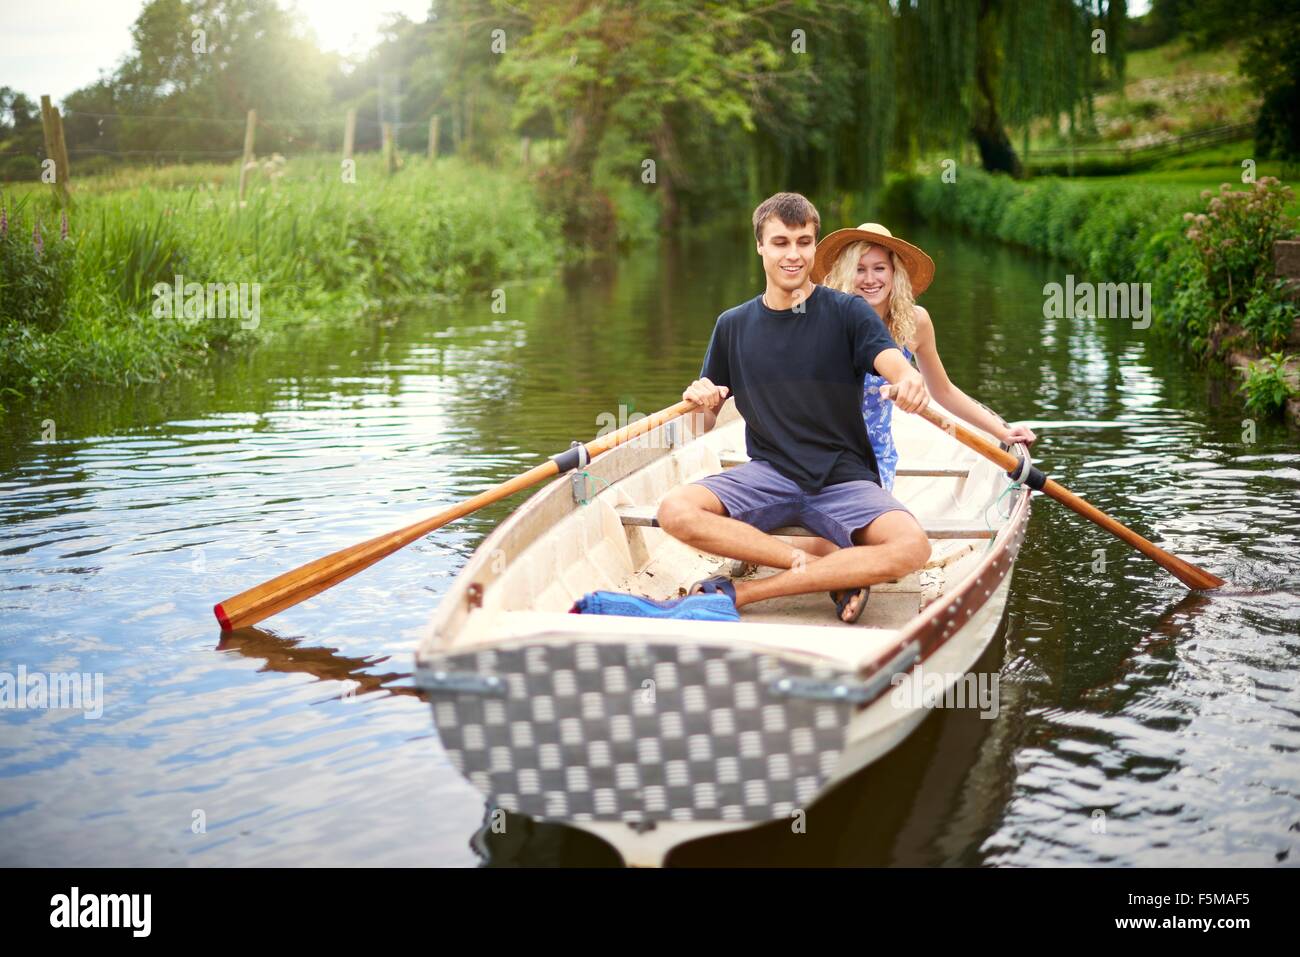 Portrait of young couple rowing on rural river Stock Photo